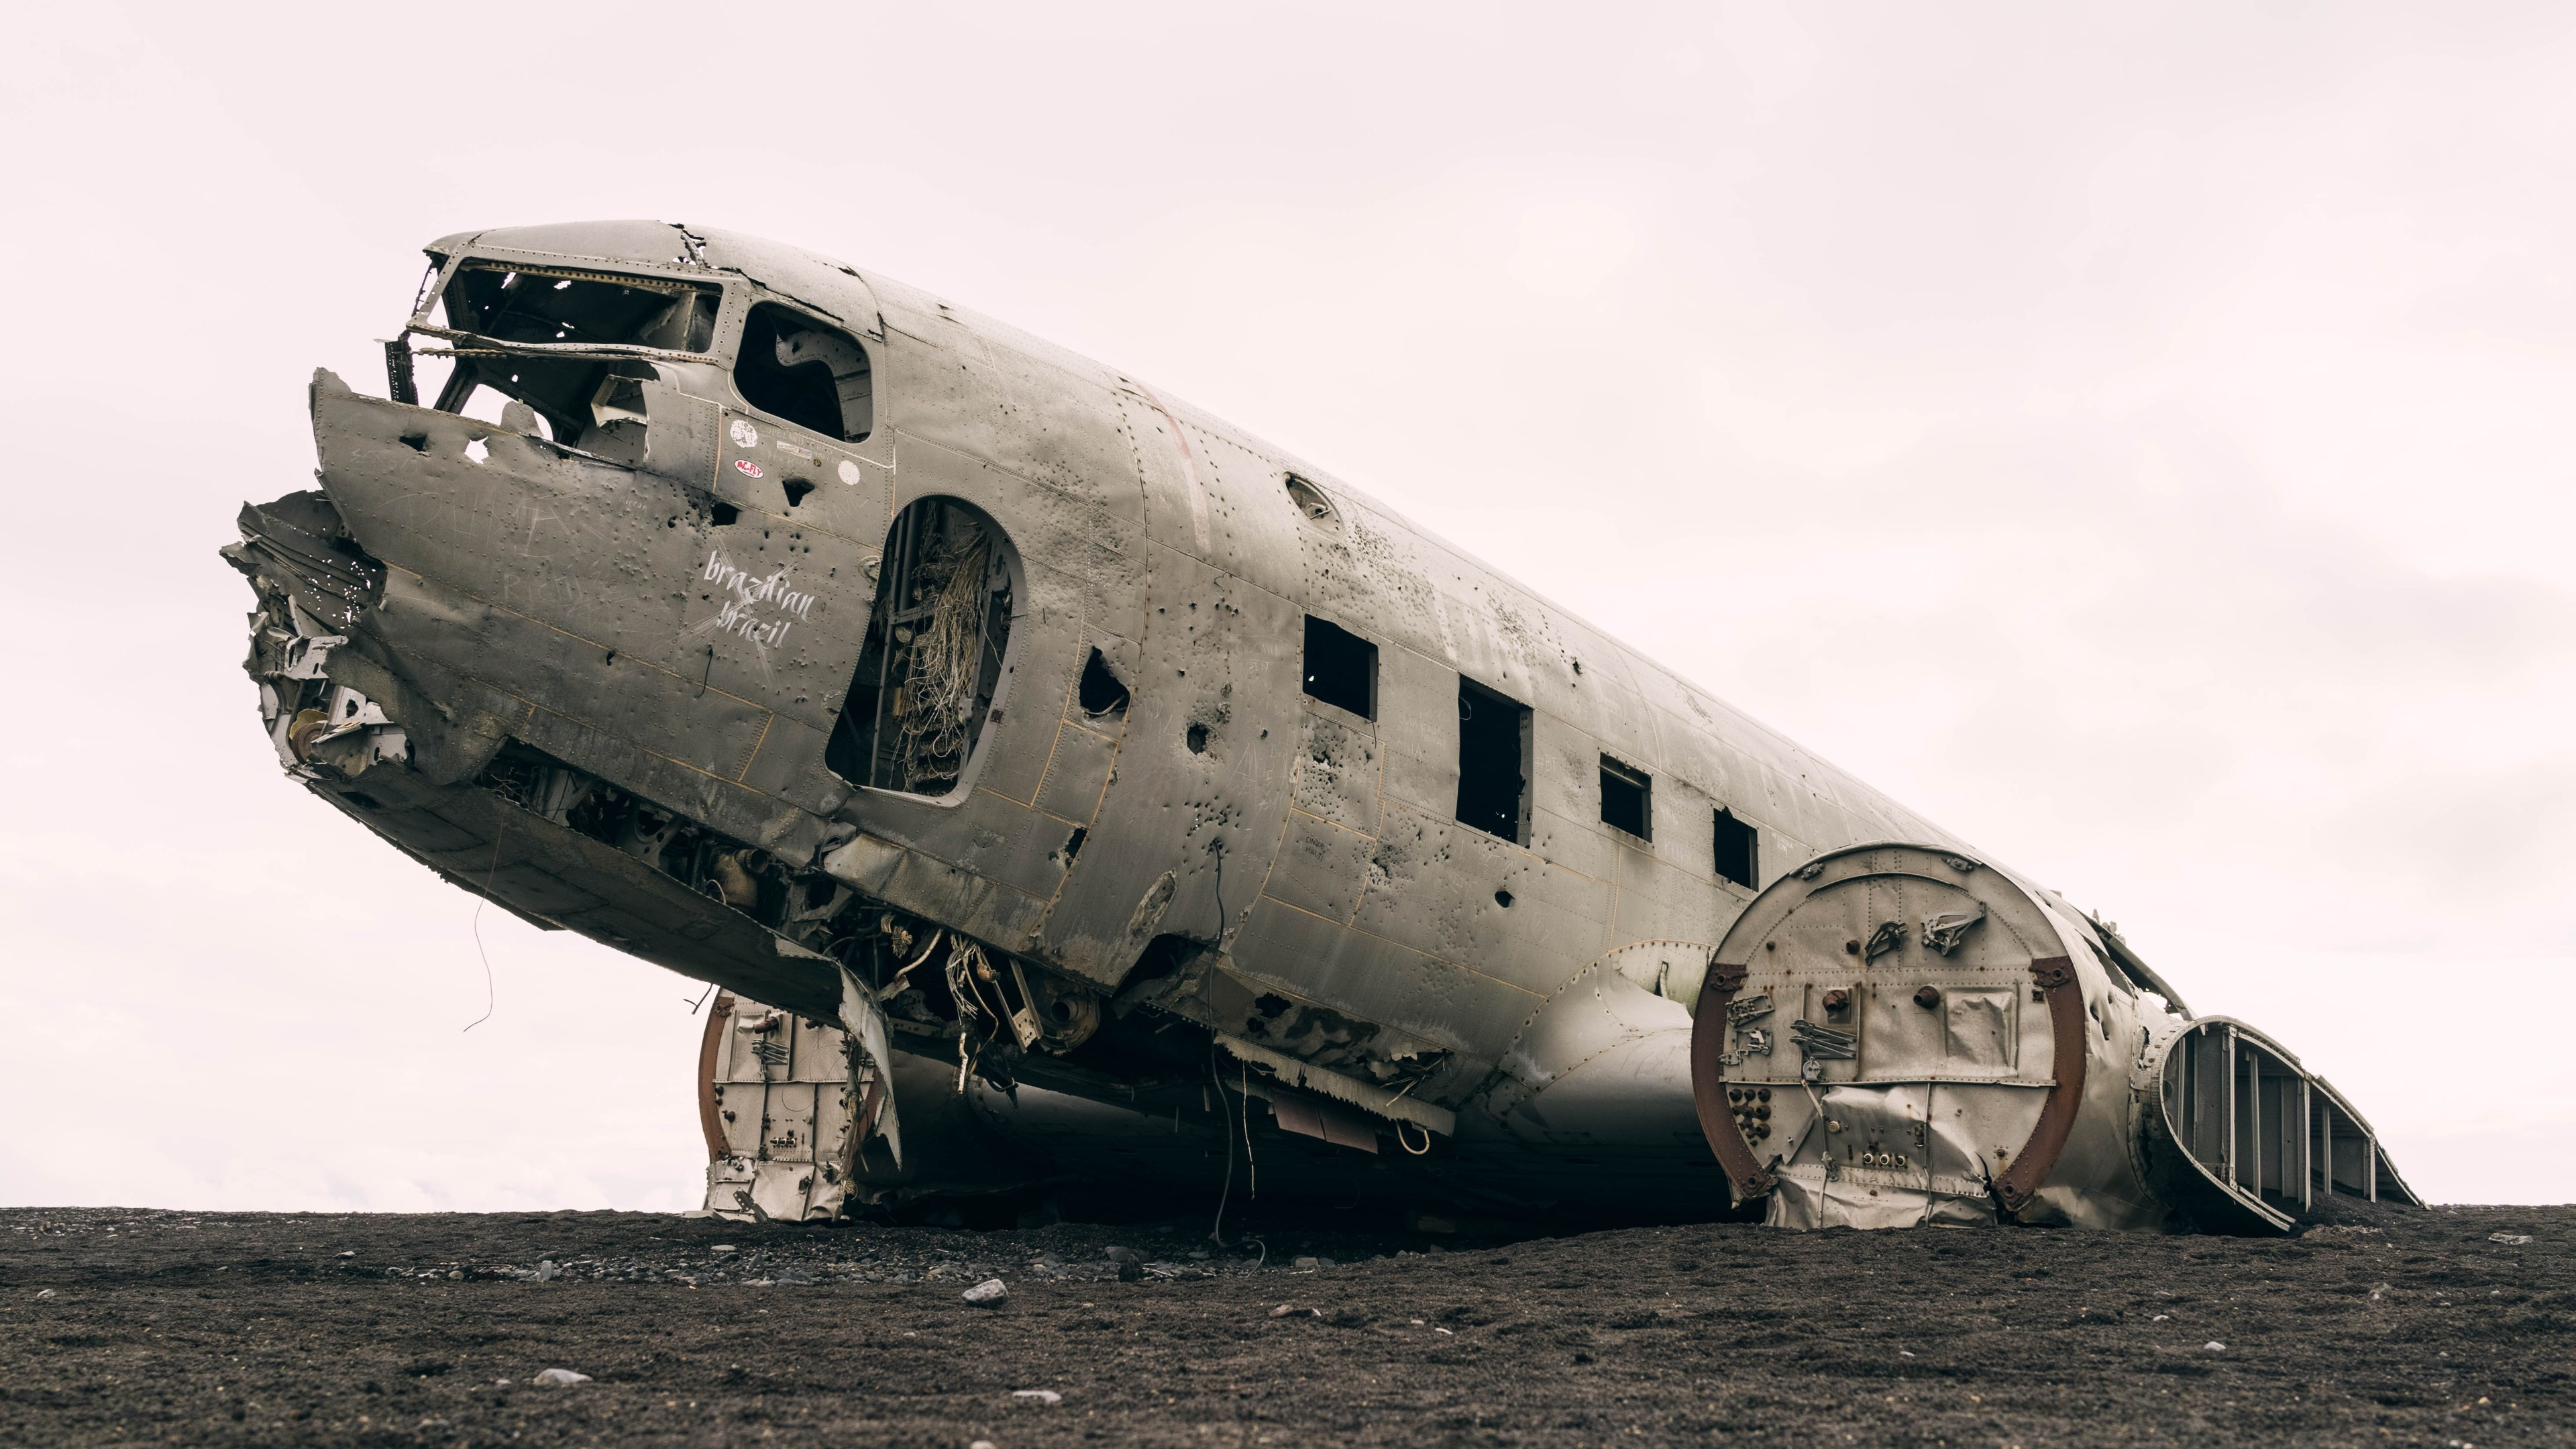 Wrecked airplane wallpaper 3840x2160